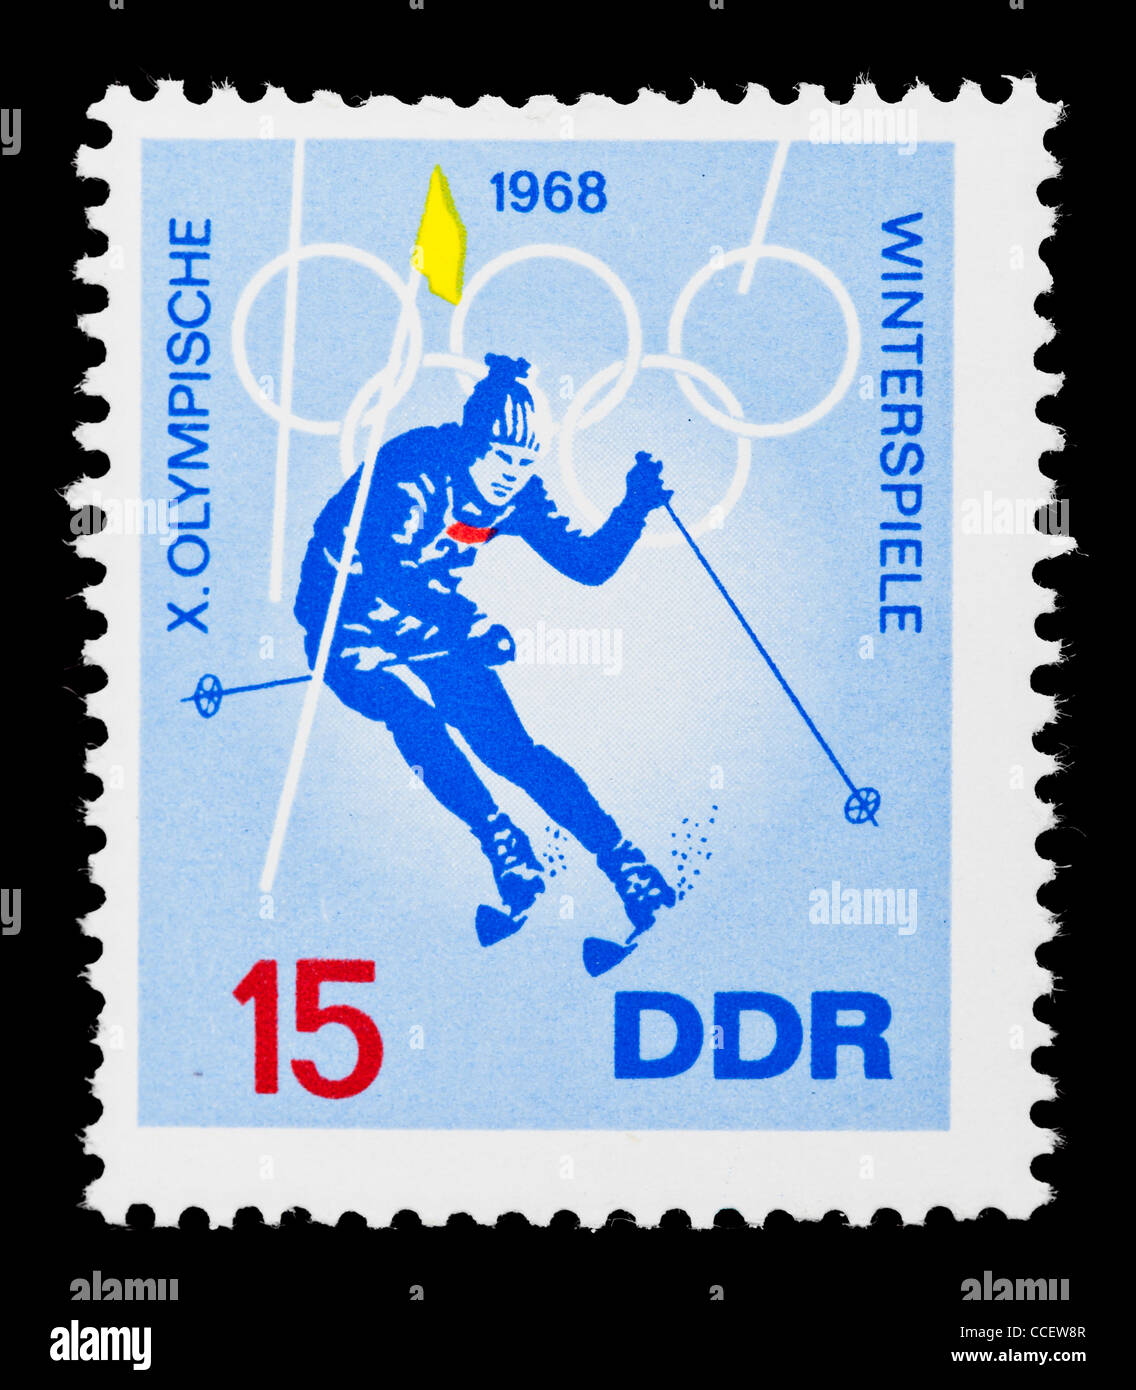 Postage stamp: X. Olympic Winter Games 1968, DDR, mint condition Stock Photo